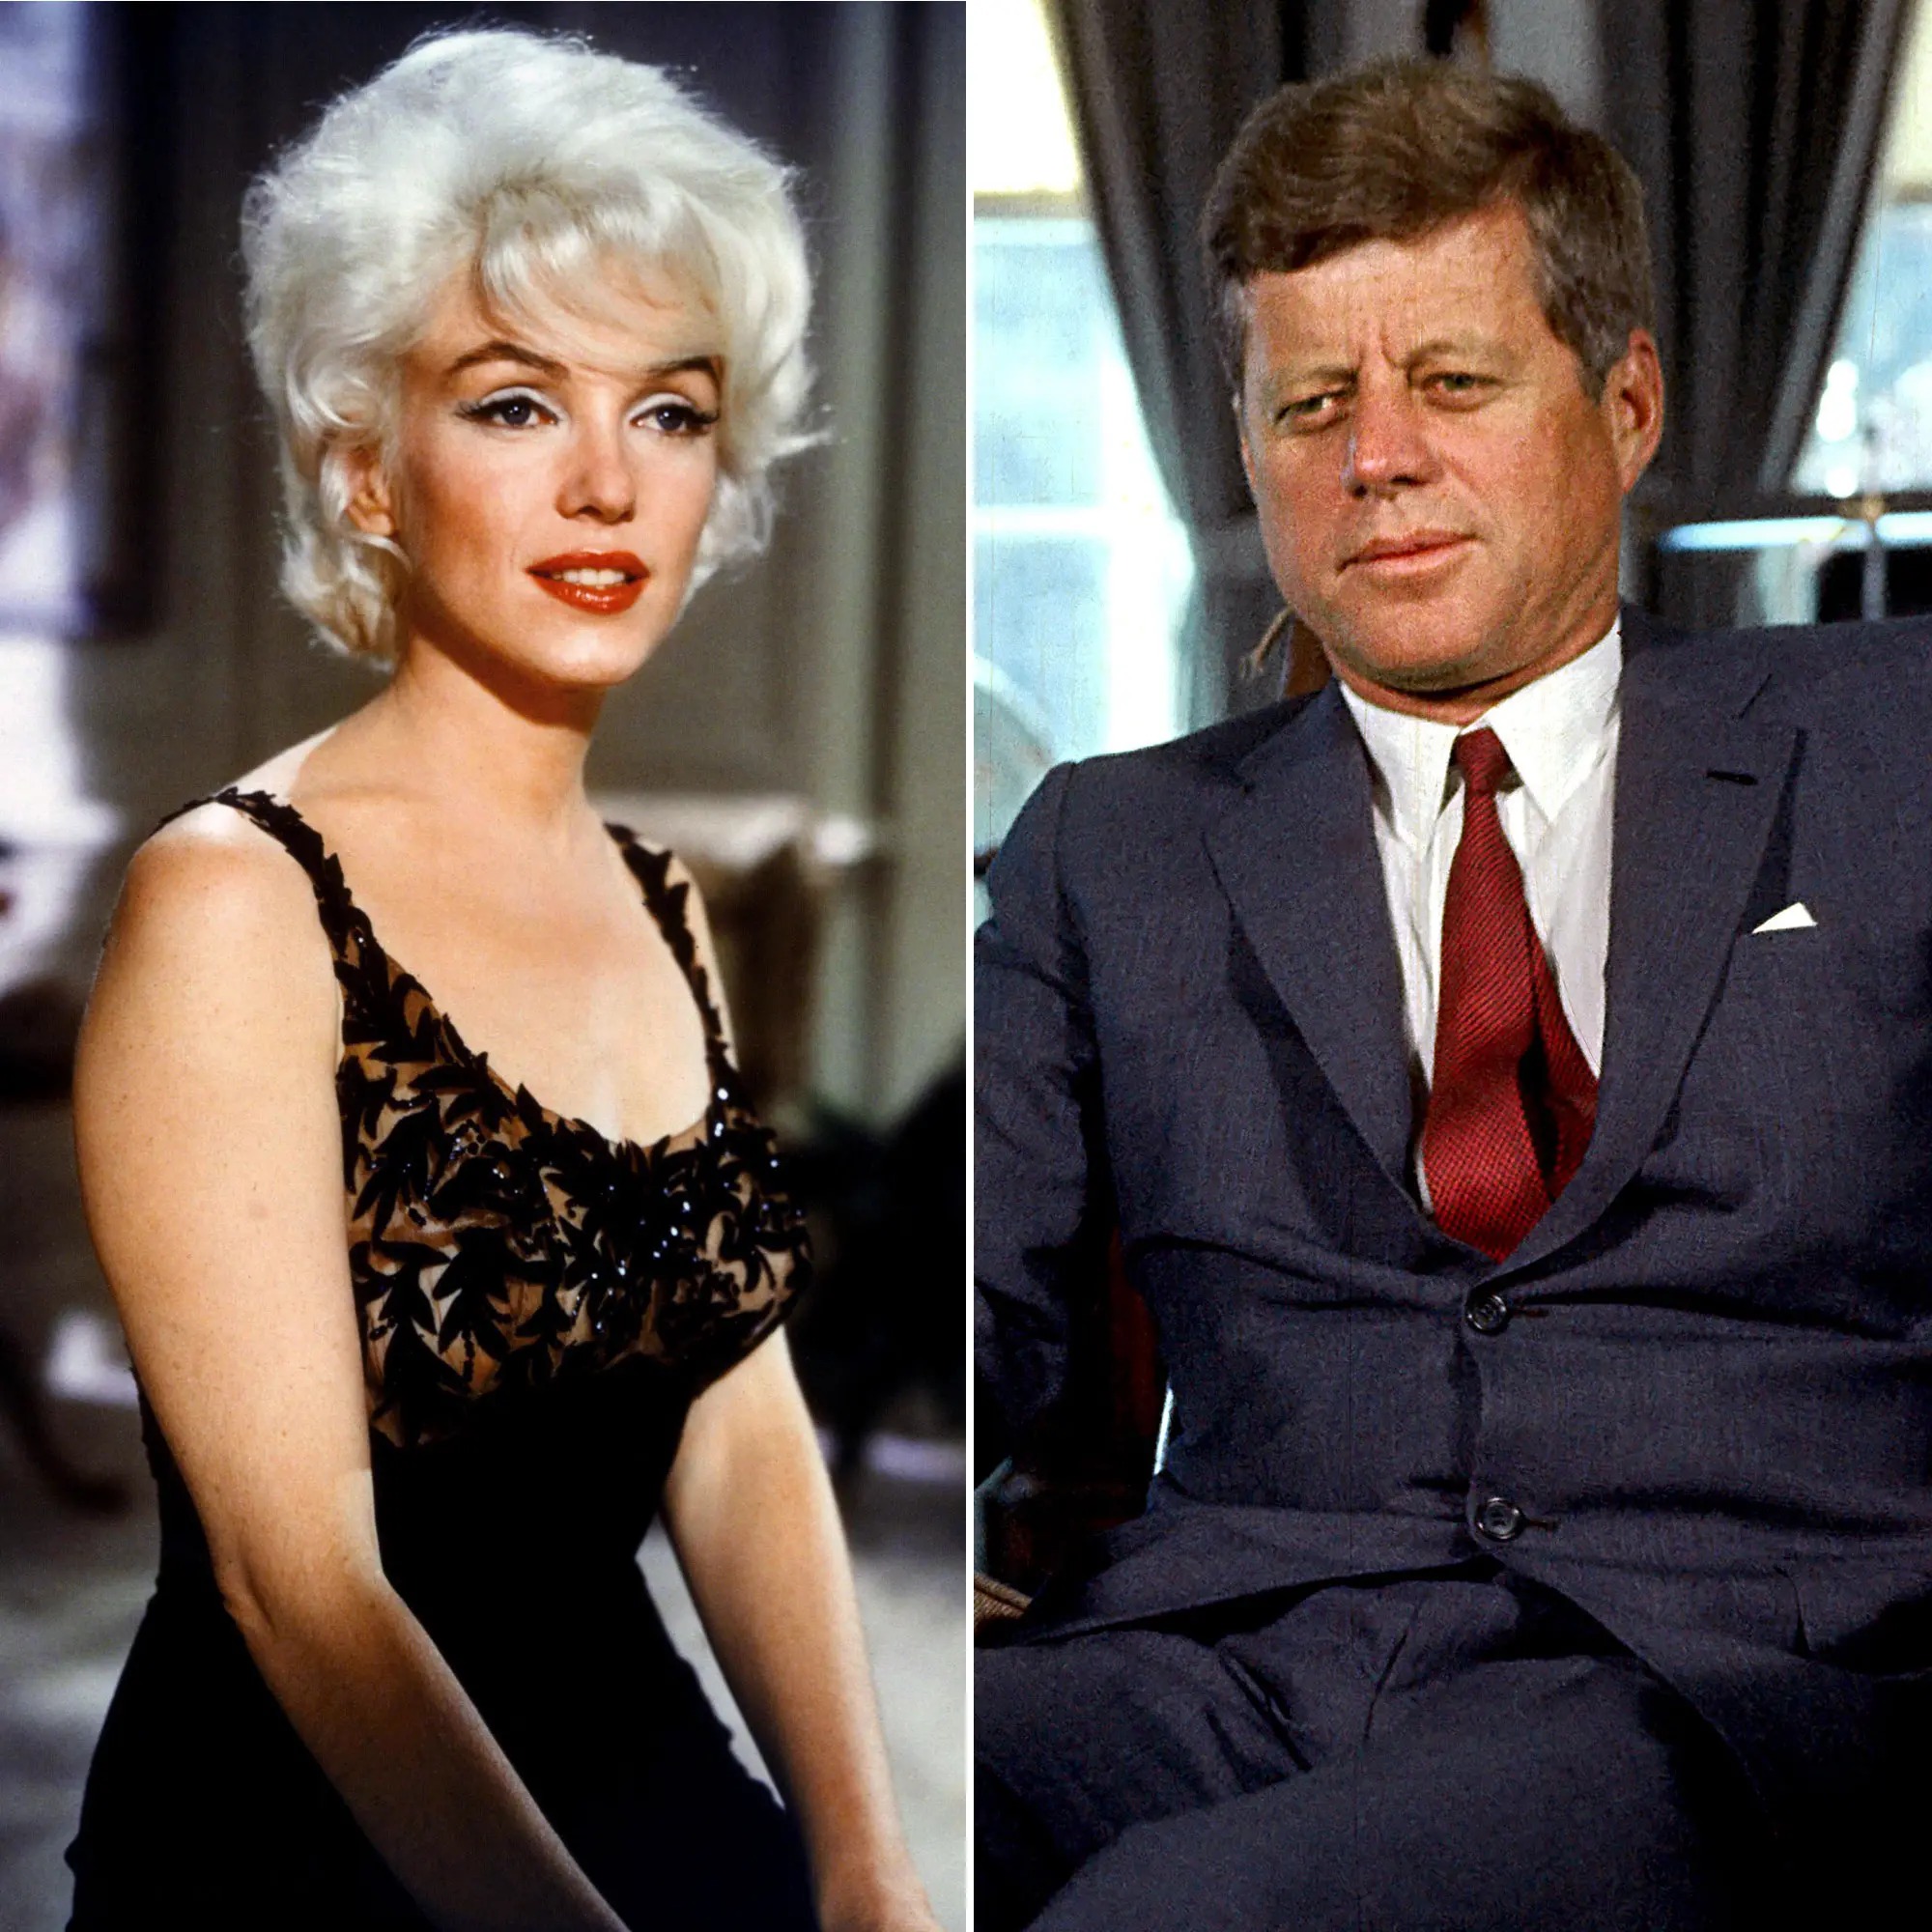 "The CIA killed Marilyn Monroe because Kennedy had been disclosing classified information to her."